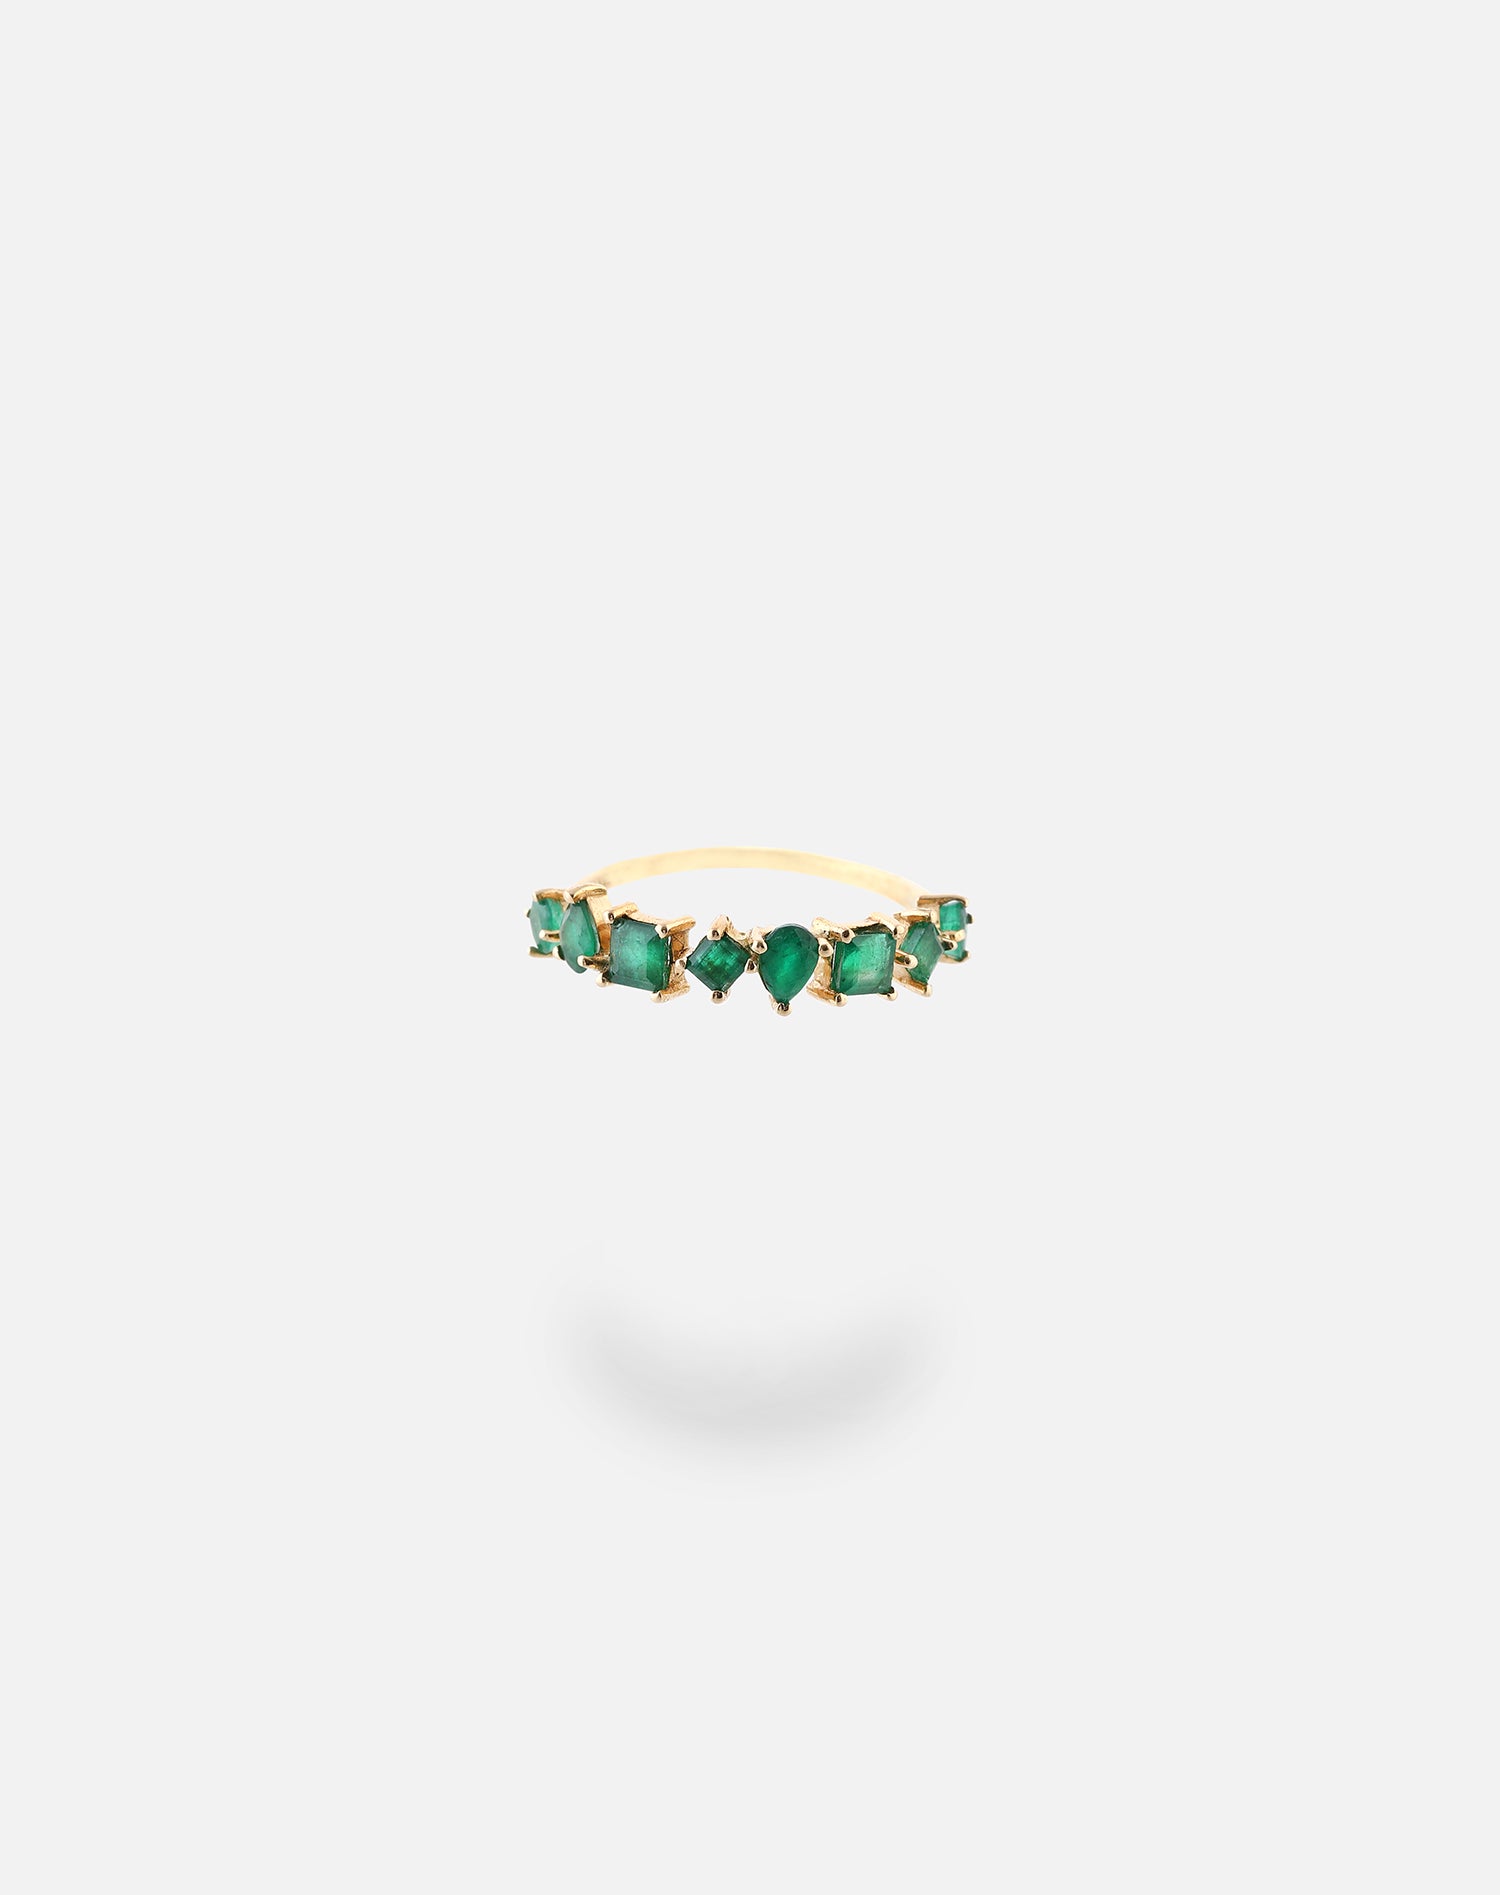 Buy Emerald Gold Rings Online - Gold Ring Collections - Jos Alukkas Online